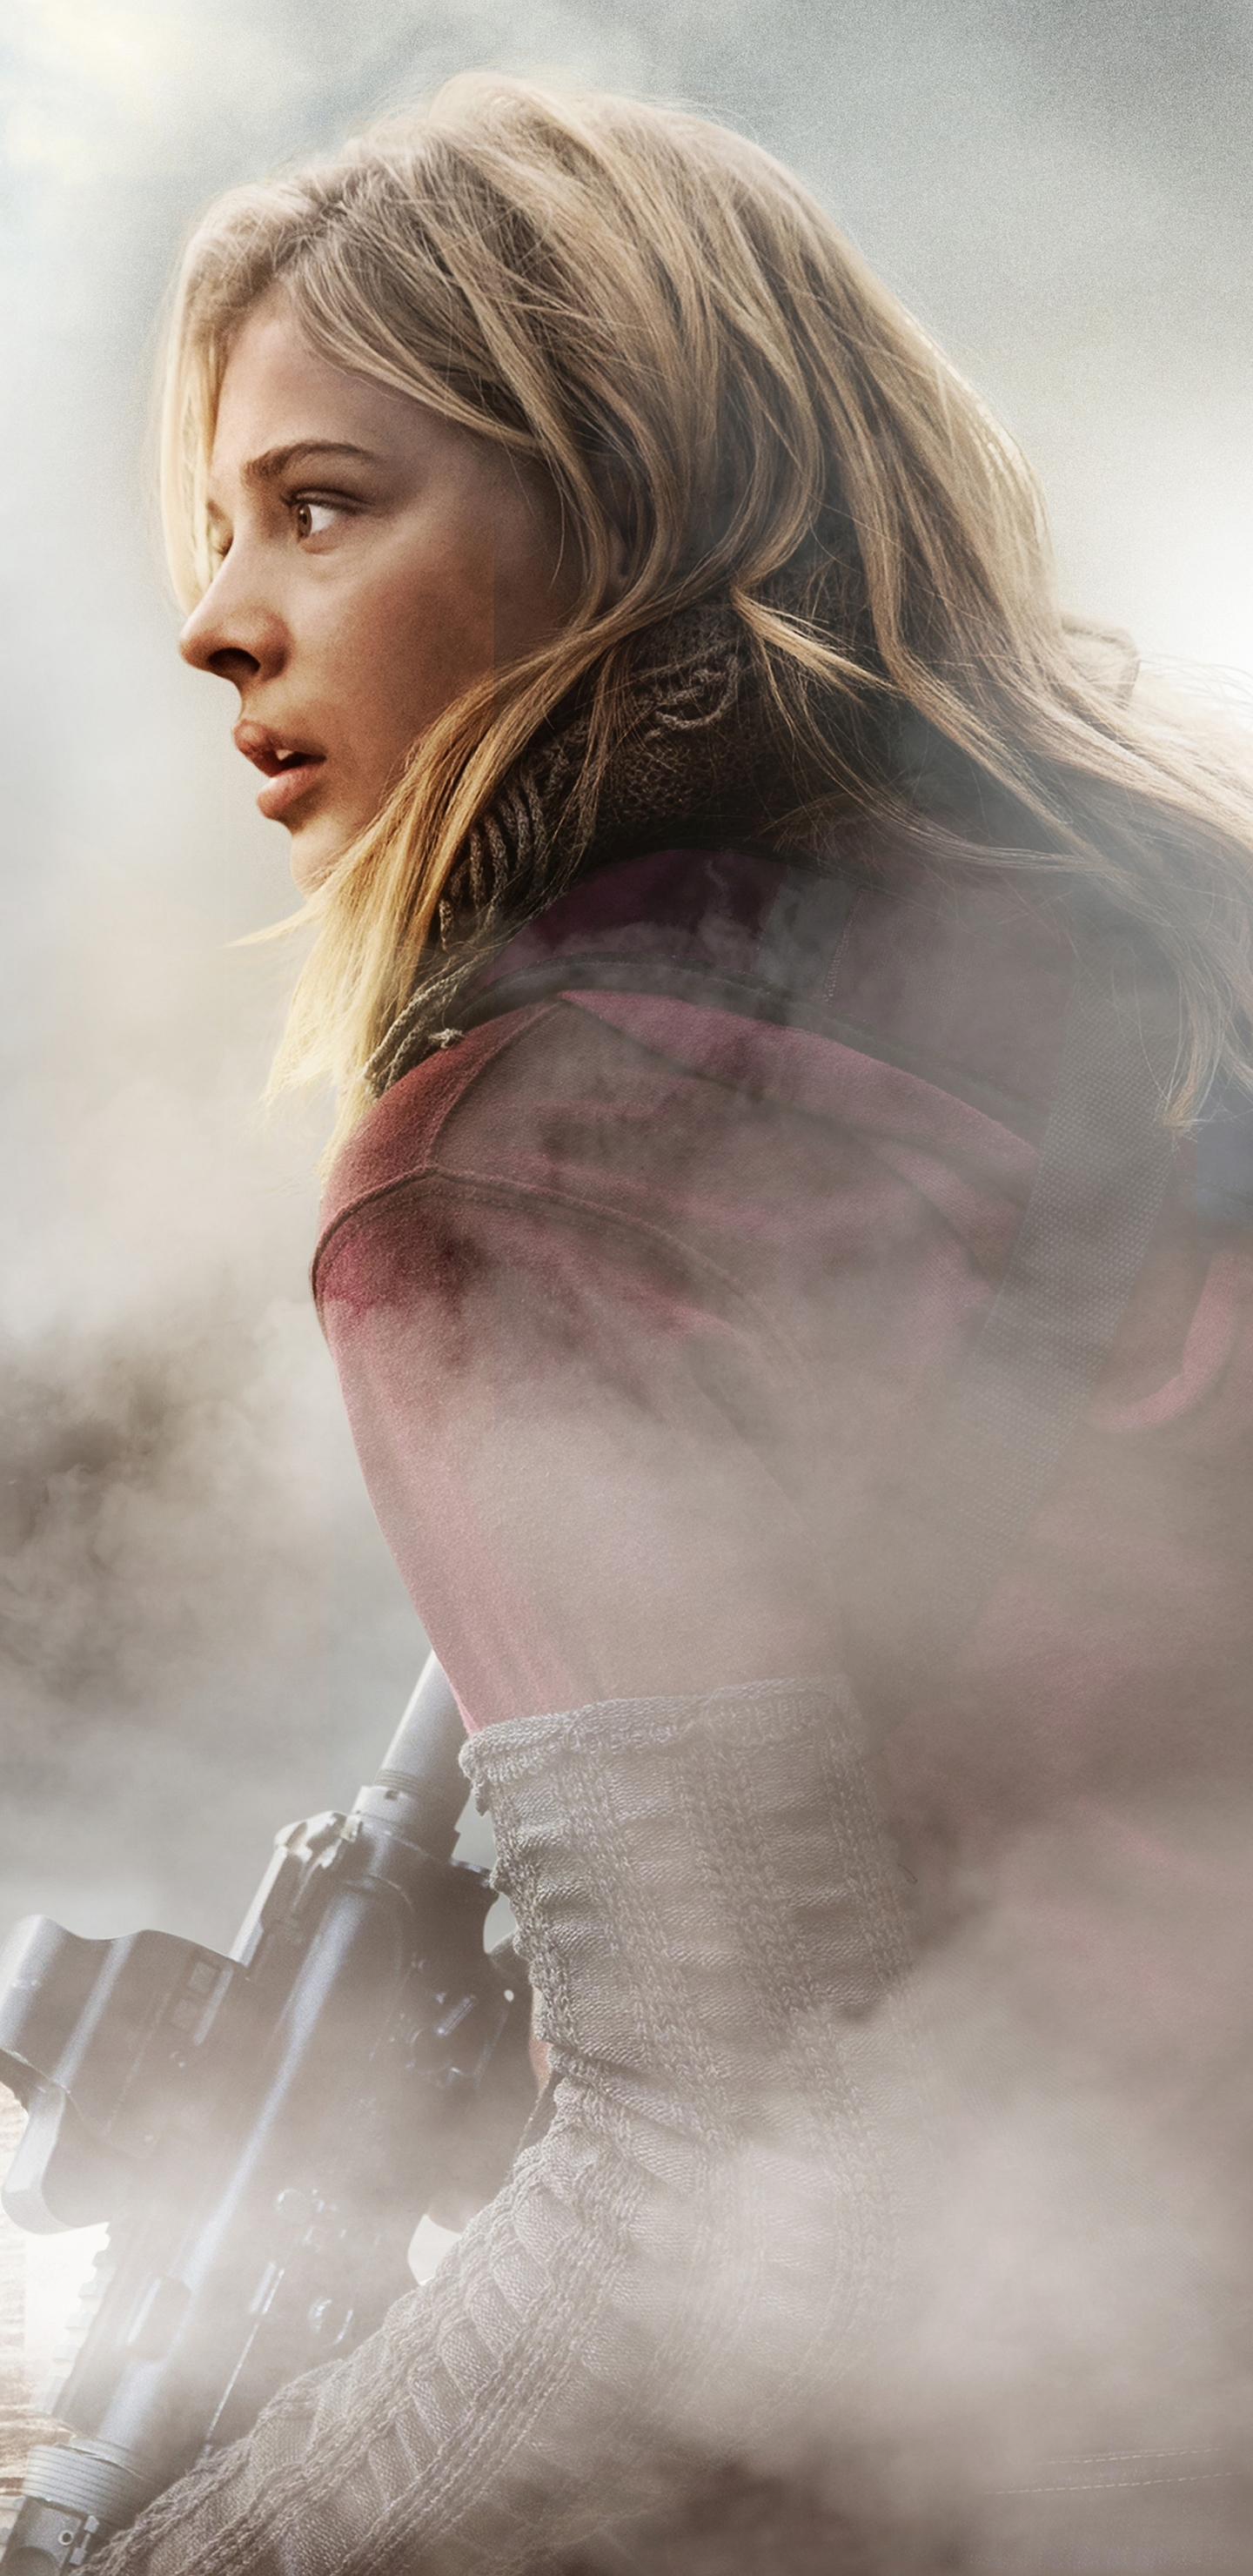 The 5th Wave Phone Wallpaper